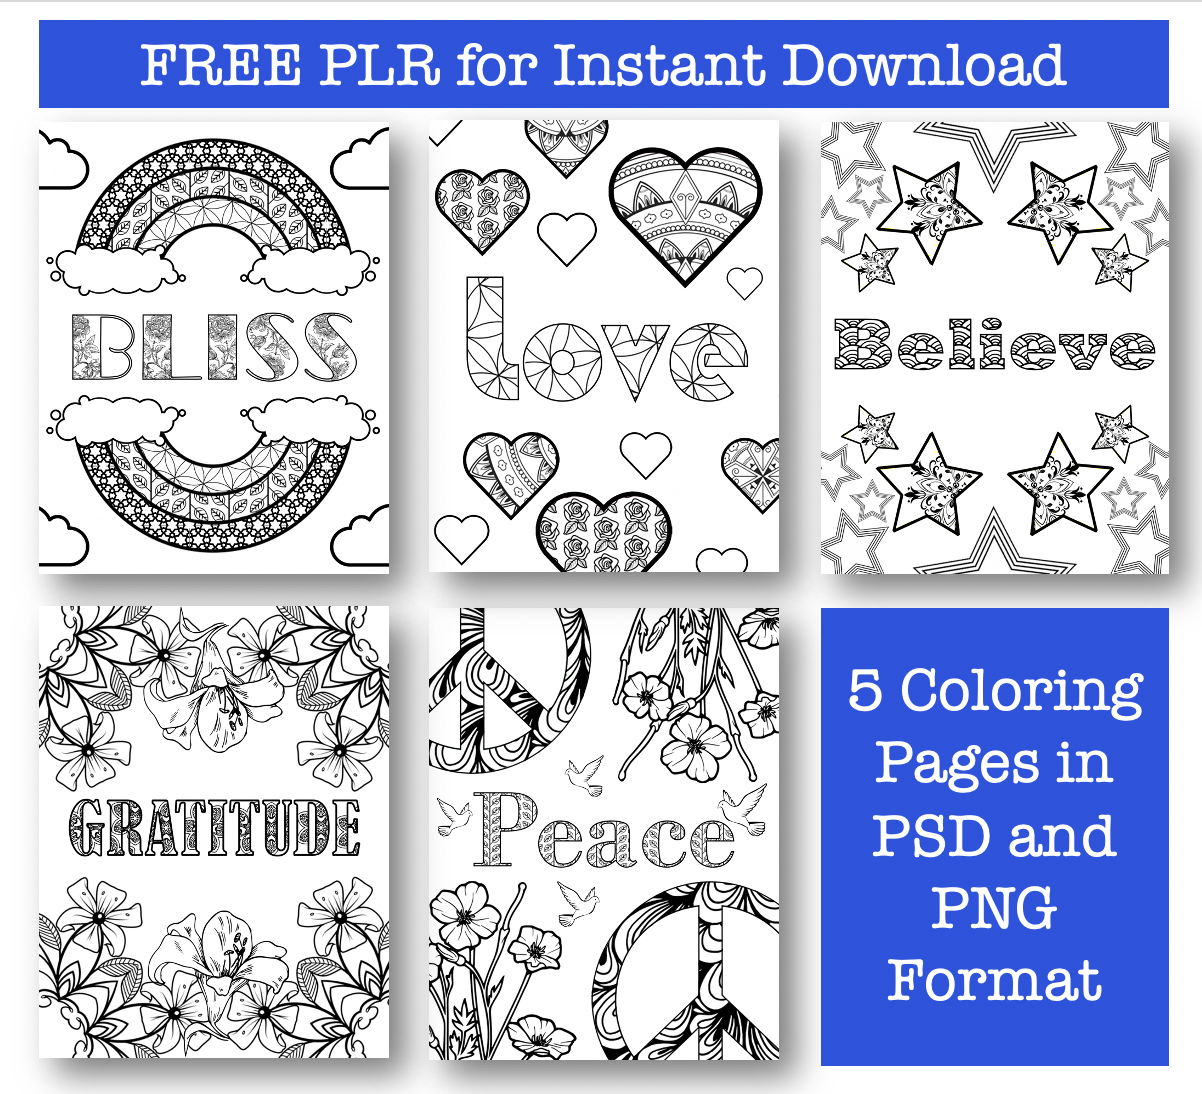 5 Free PLR Coloring Pages